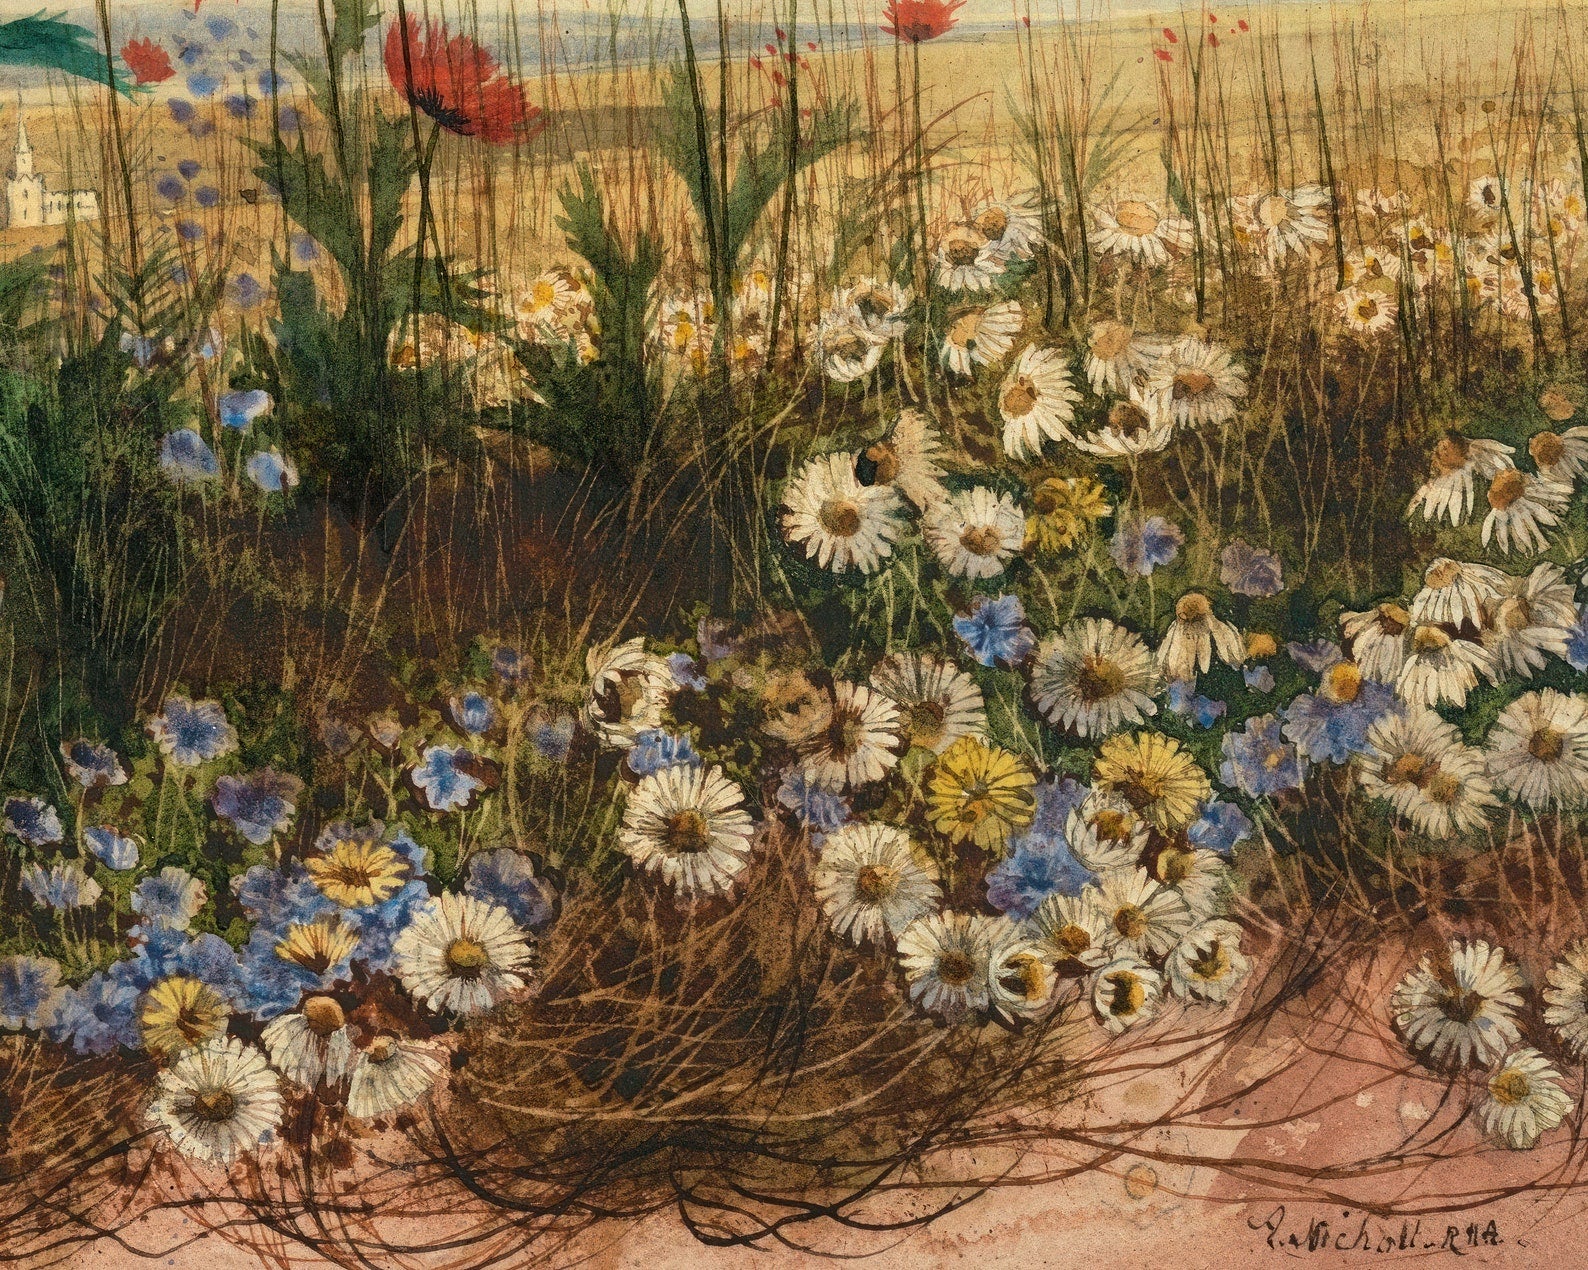 Andrew Nicholls "A Distant View of Derry Through a Bank of Wild Flowers” (c.1830) - Mabon Gallery